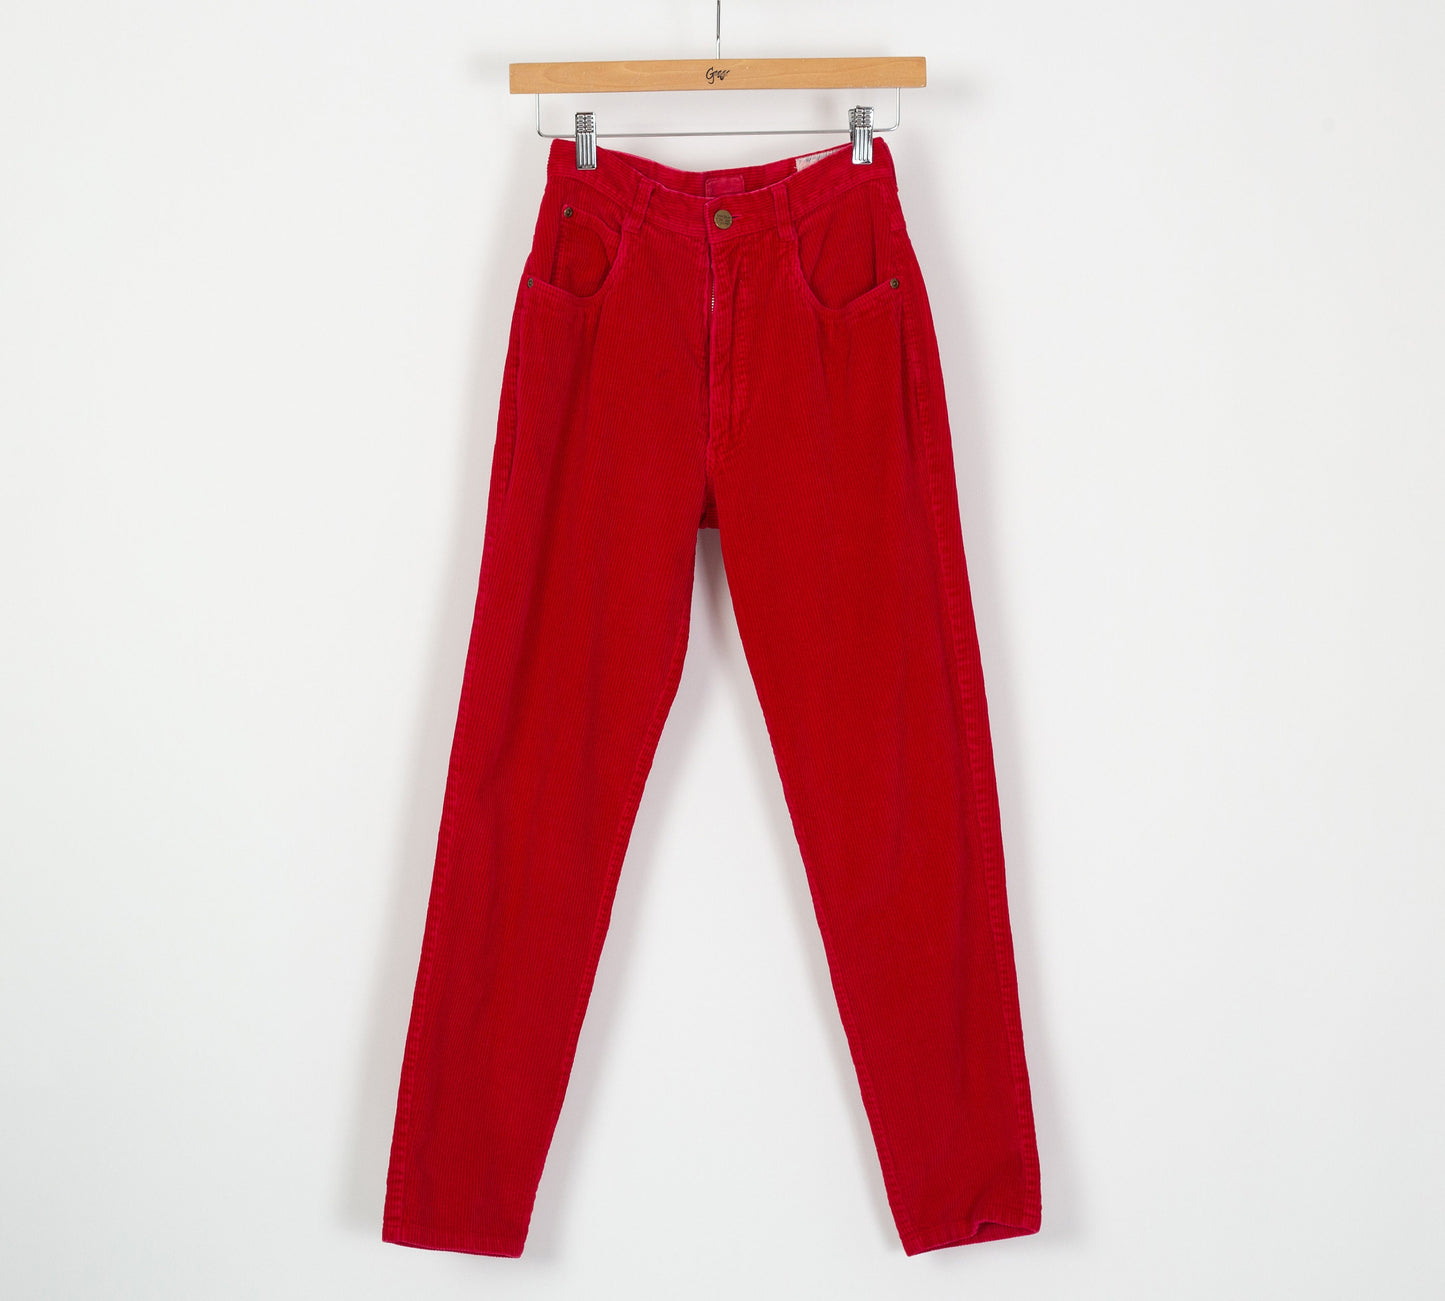 Vintage Red Corduroy High Waist Pants - Extra Small, 24" 